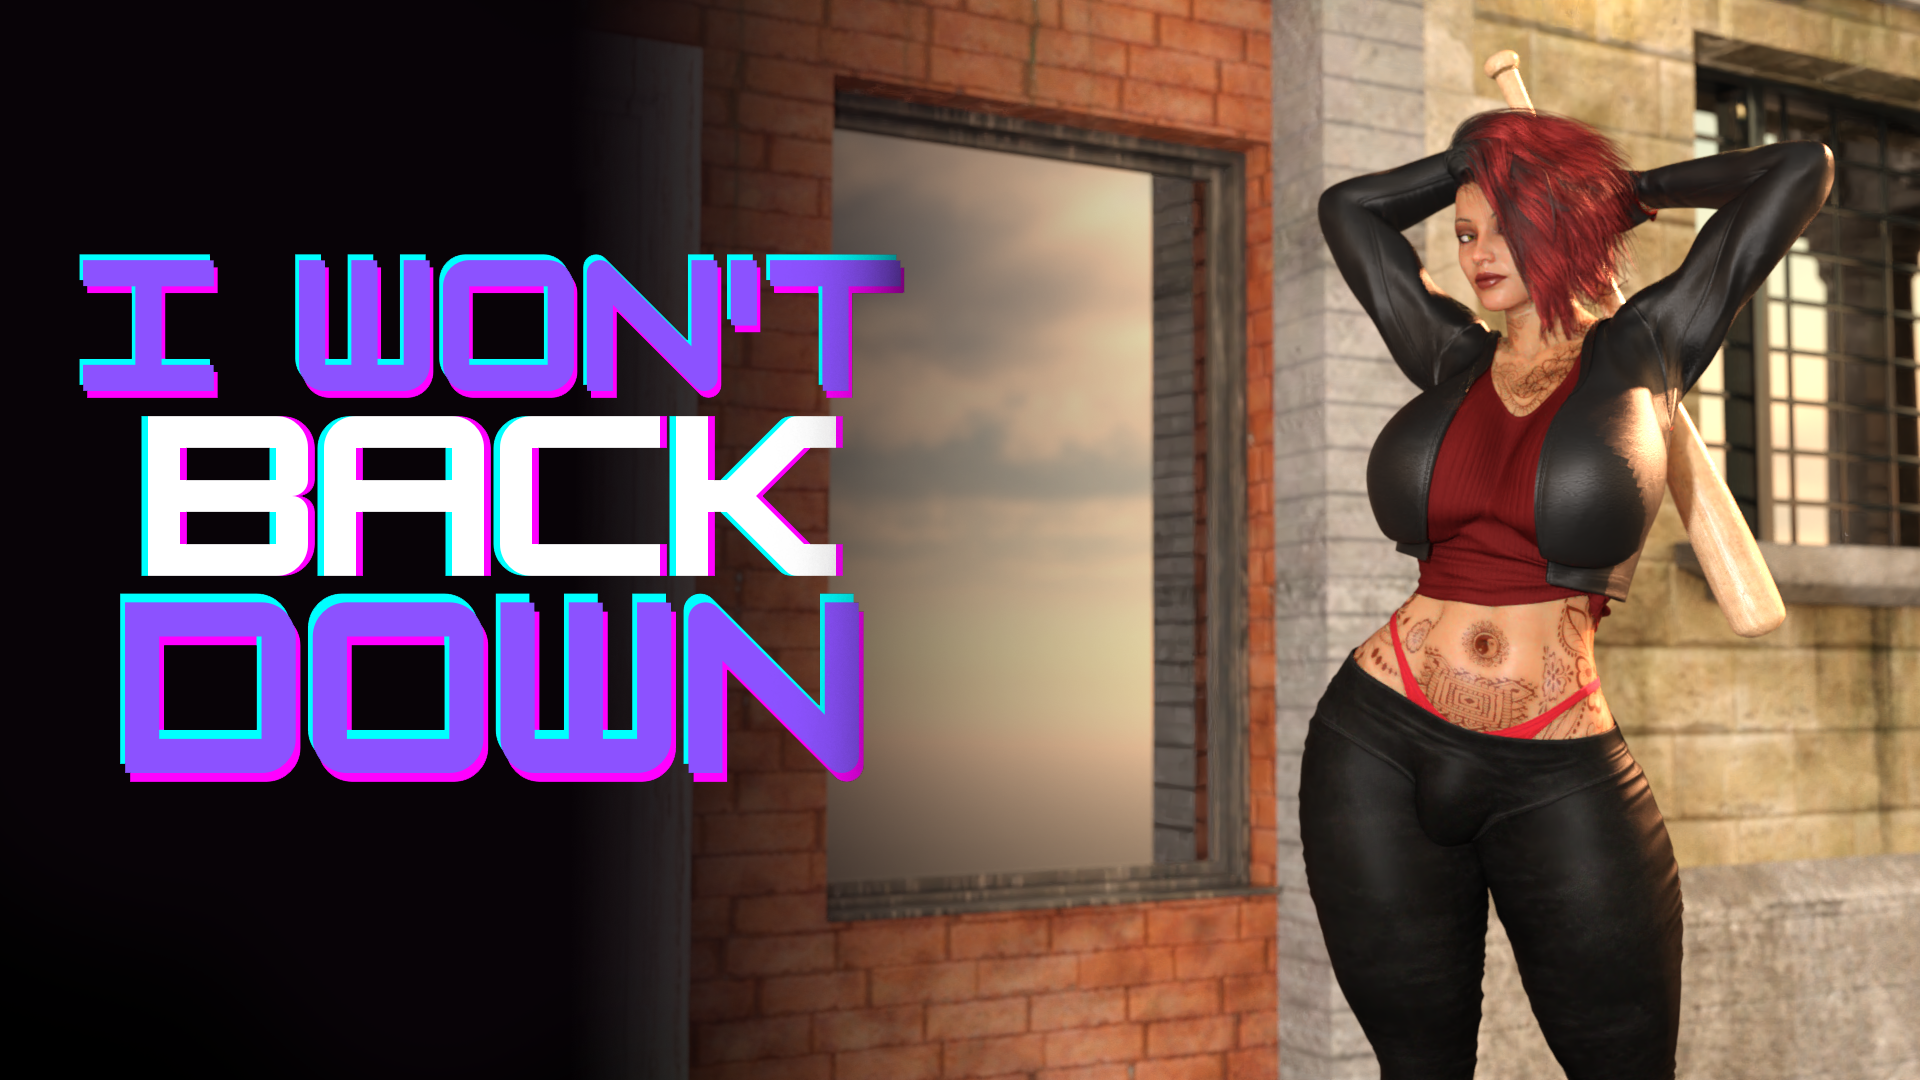 IWONTBACKDOWN.png